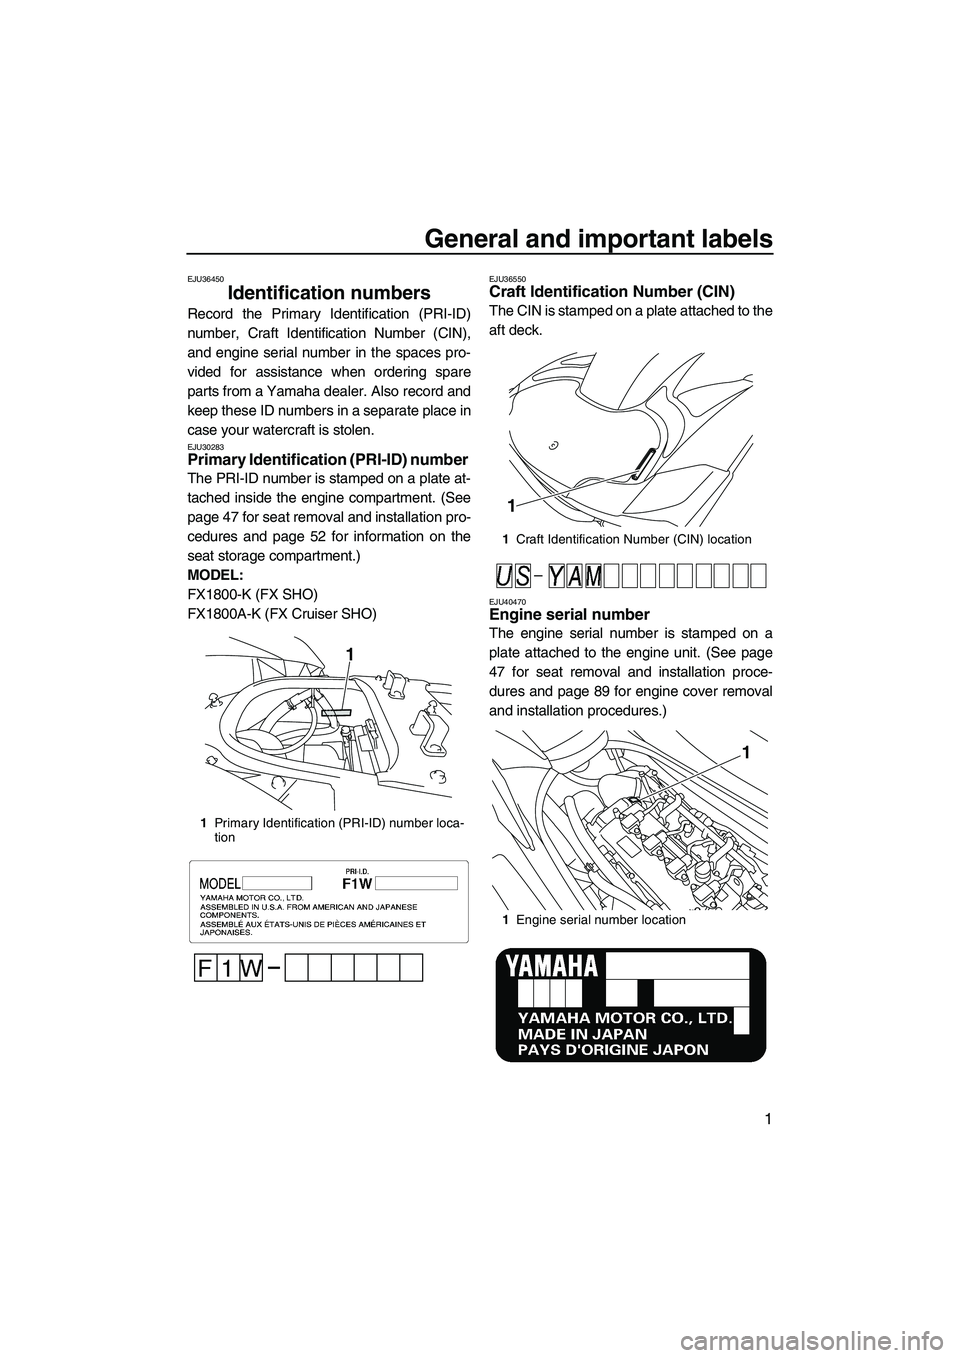 YAMAHA SVHO 2011  Owners Manual General and important labels
1
EJU36450
Identification numbers 
Record the Primary Identification (PRI-ID)
number, Craft Identification Number (CIN),
and engine serial number in the spaces pro-
vided 